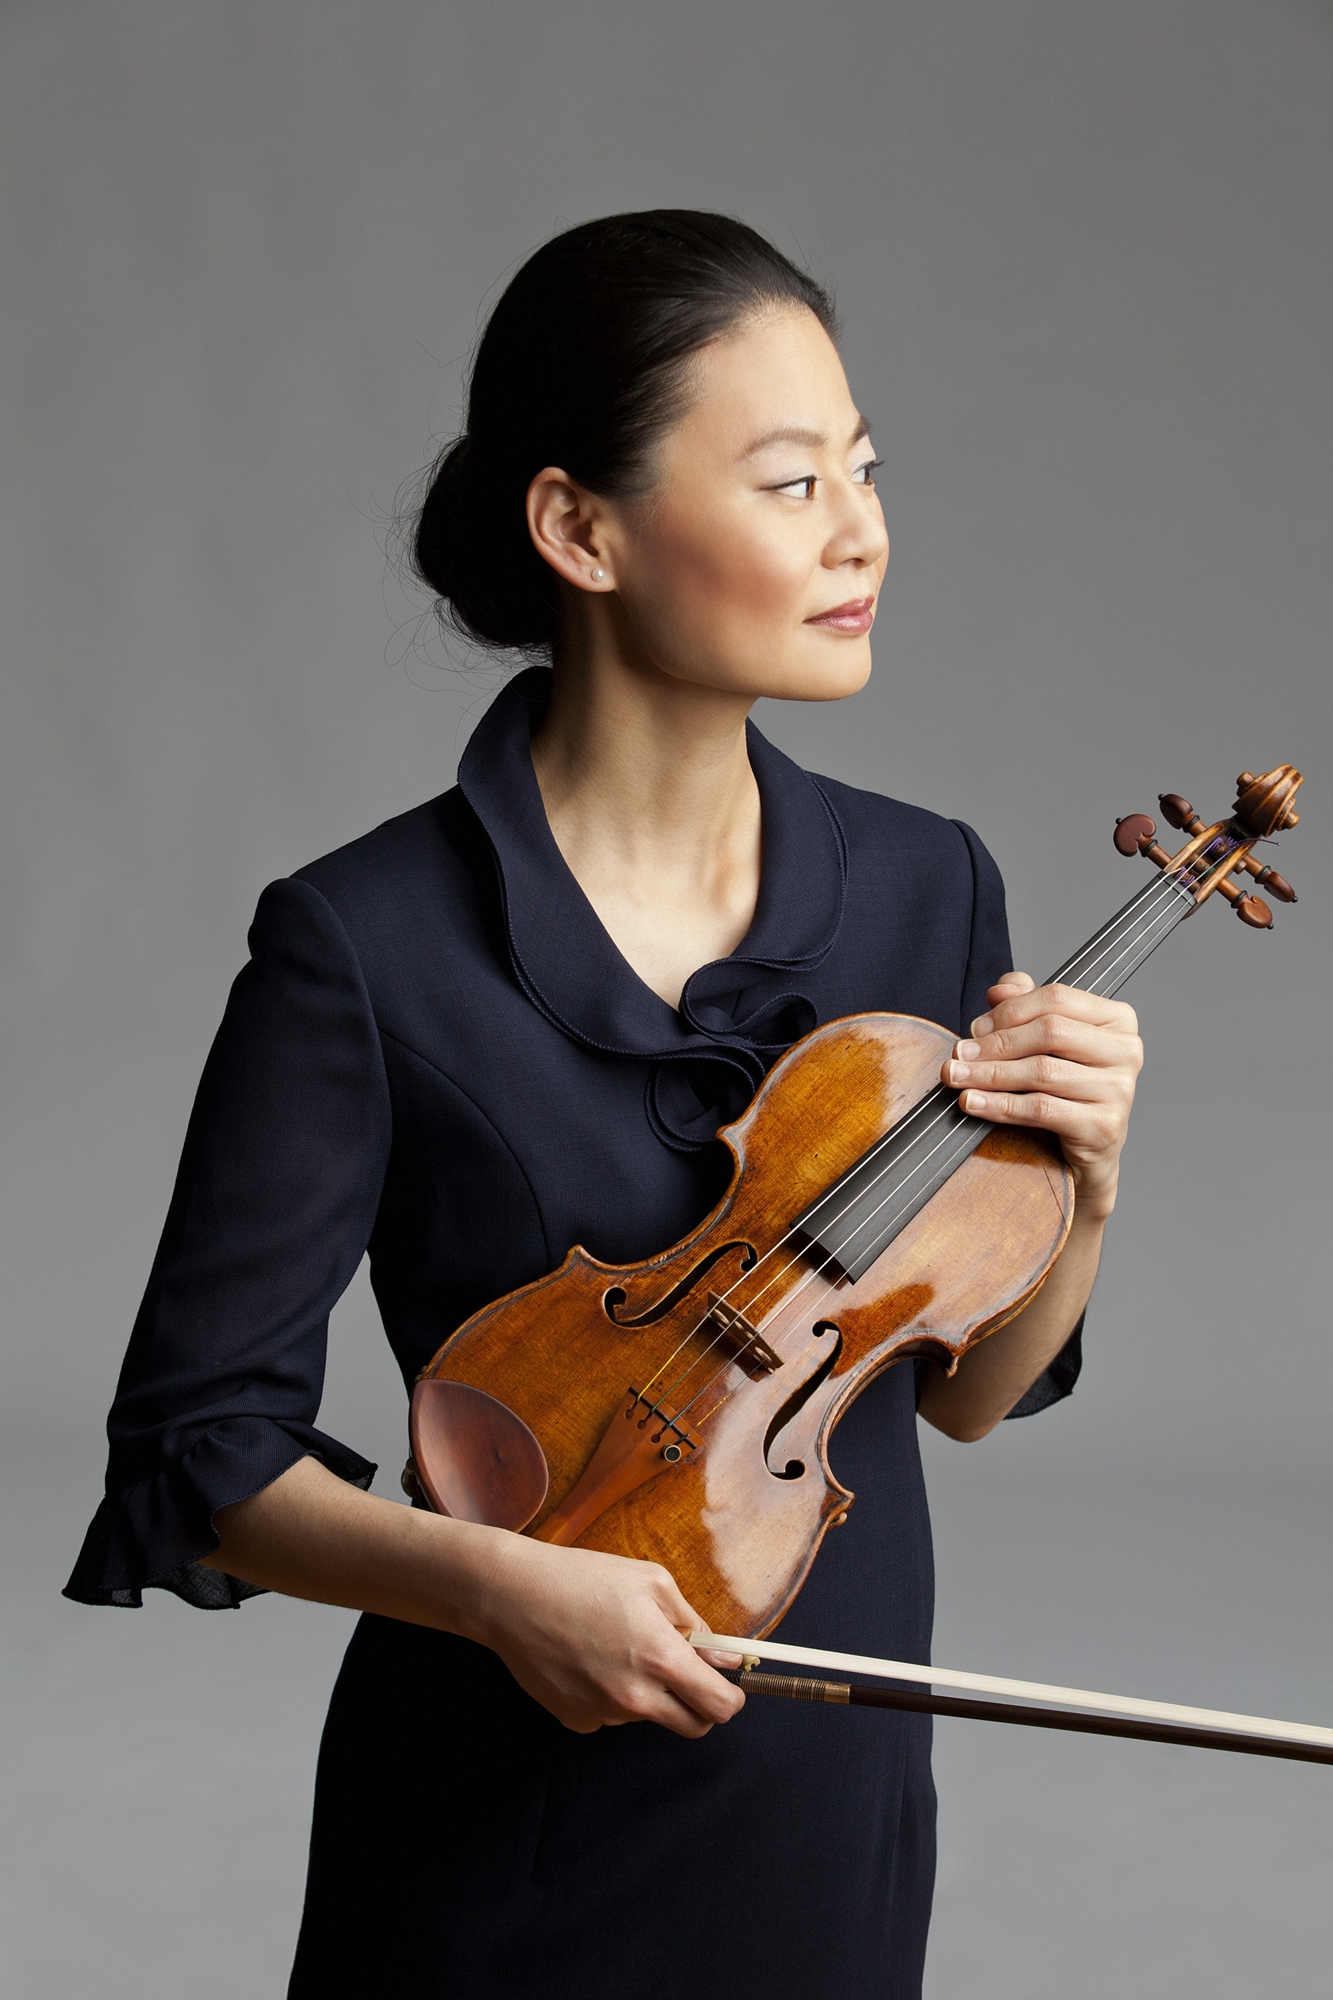 Legendary violinist Midori joined Sarasota Orchestra in February for a concert honoring the 100th anniversary of iconic American composer Leonard Bernstein’s birth. Courtesy photo